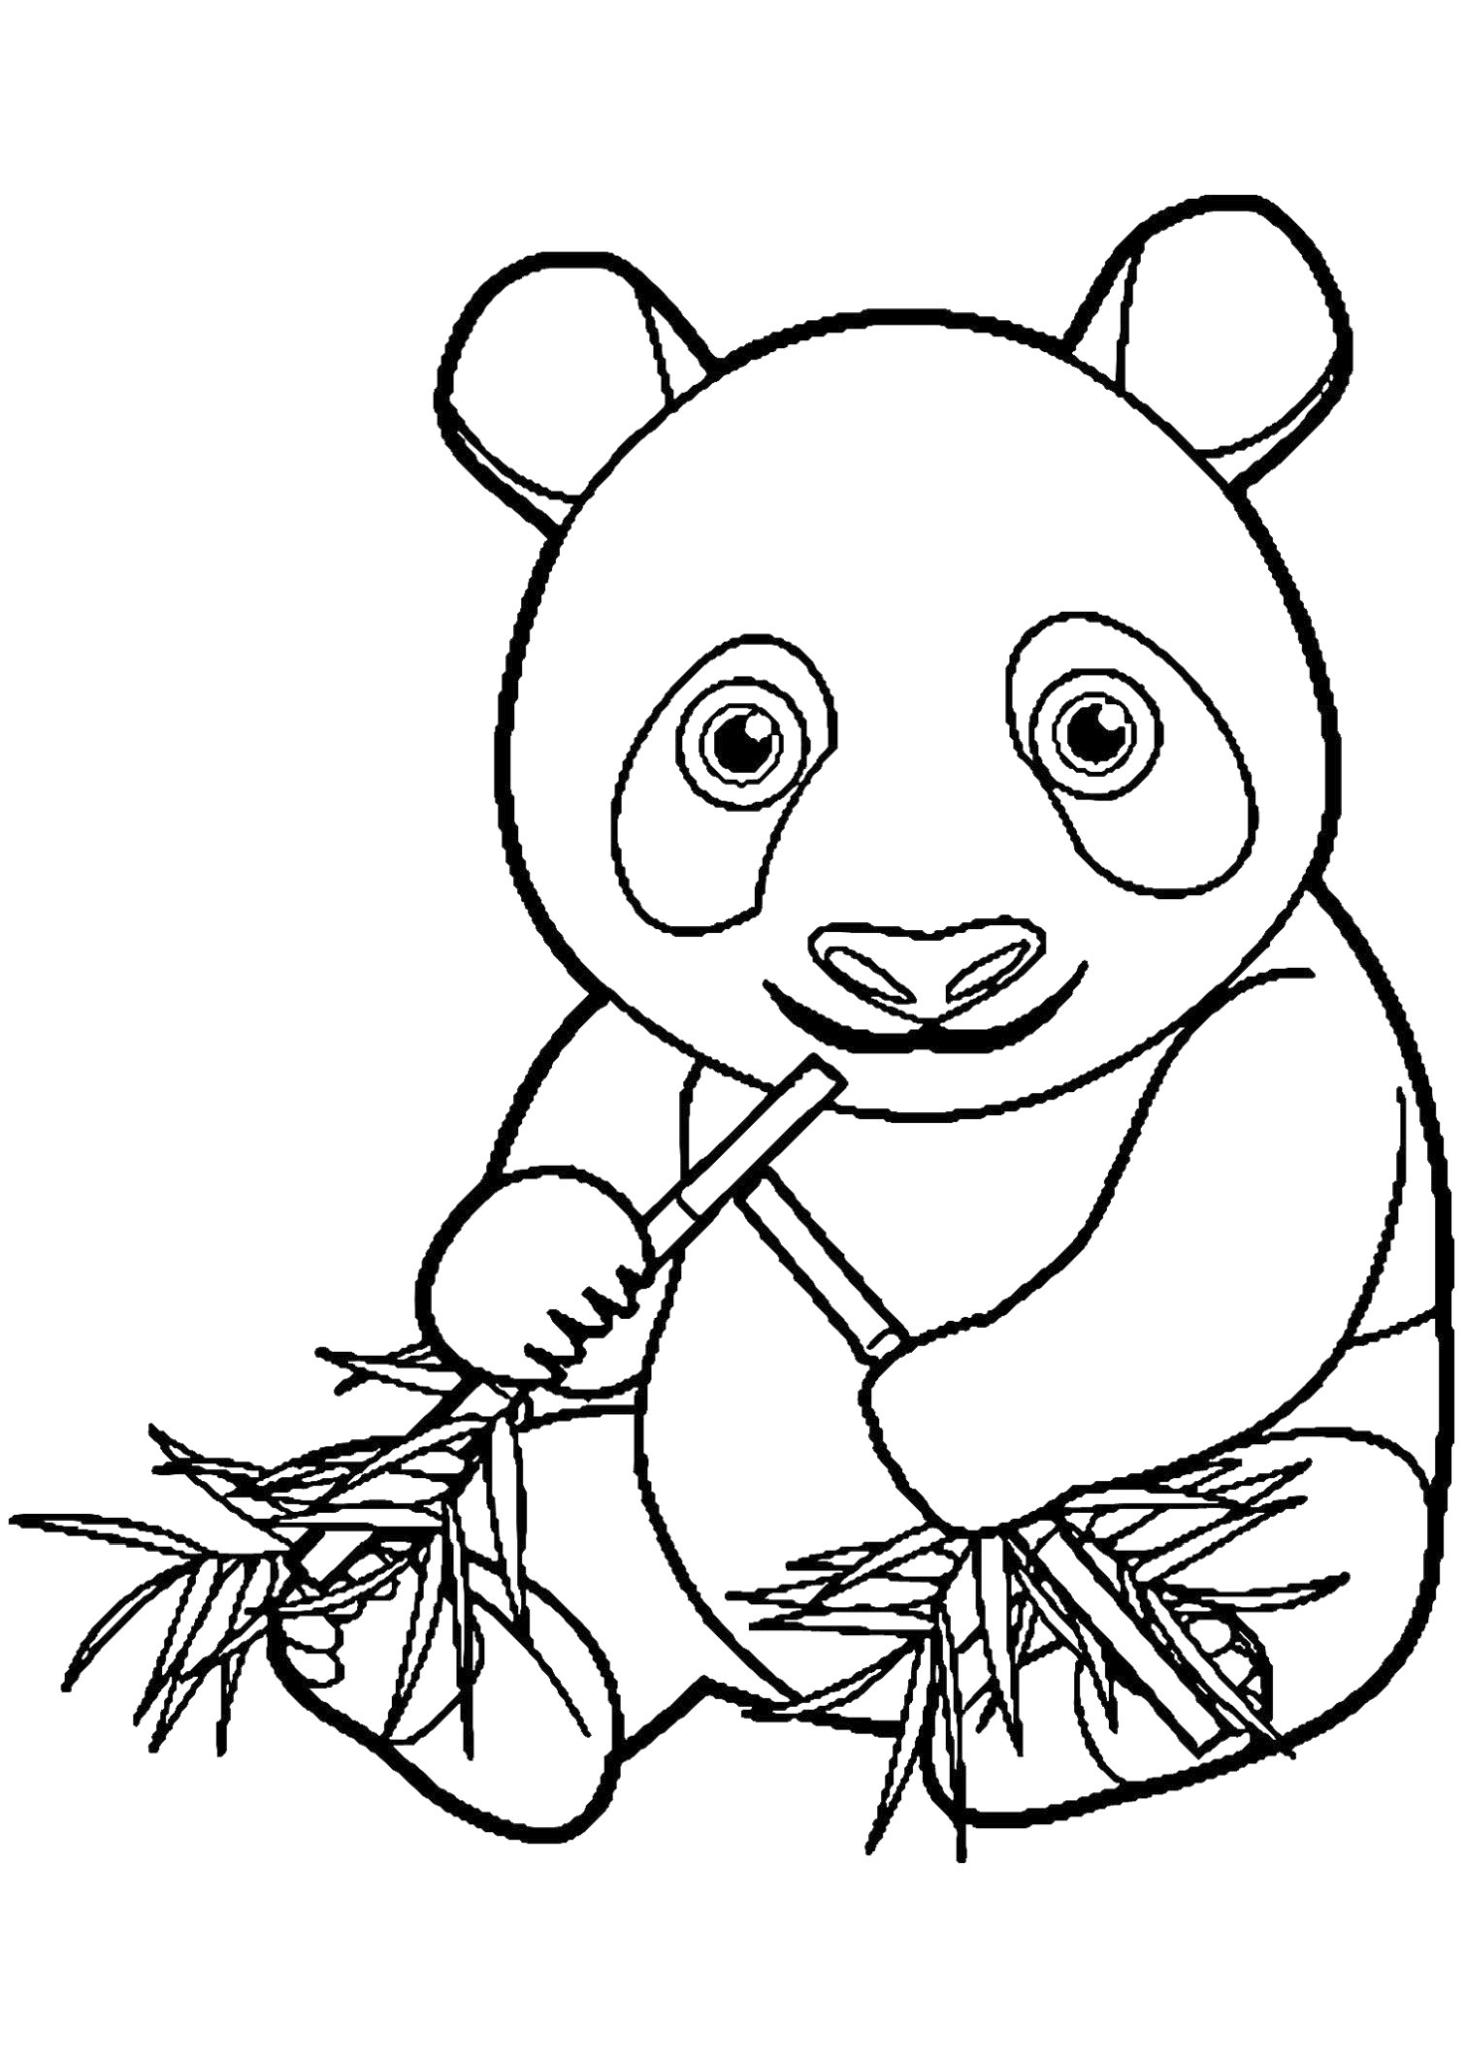 Get This Panda Coloring Pages Free